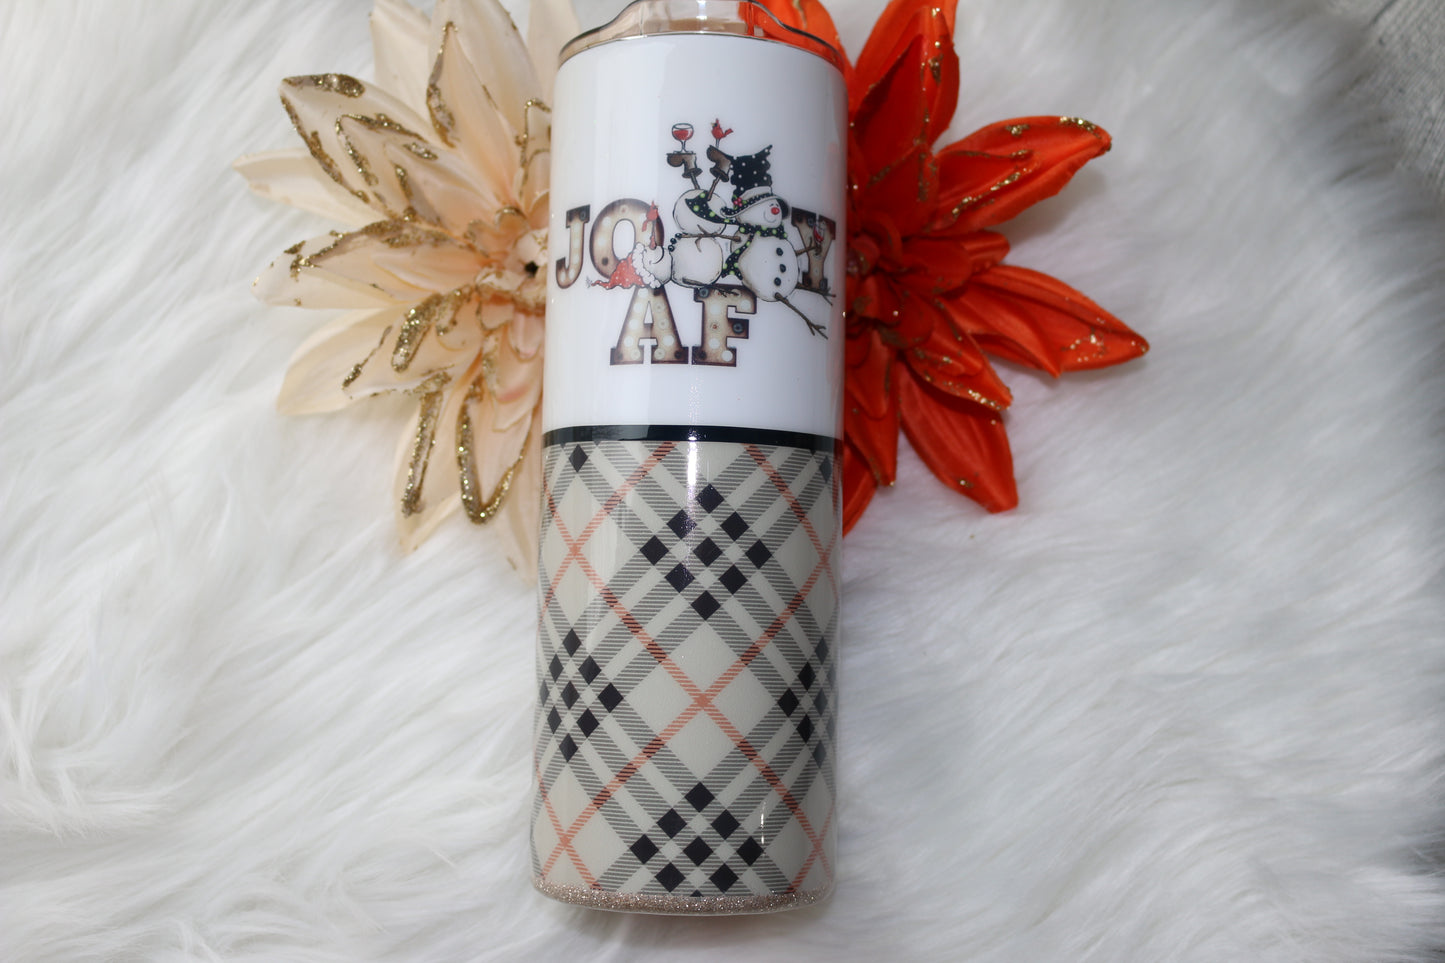 20 oz "Jolly AF" Stainless Steal Tumbler